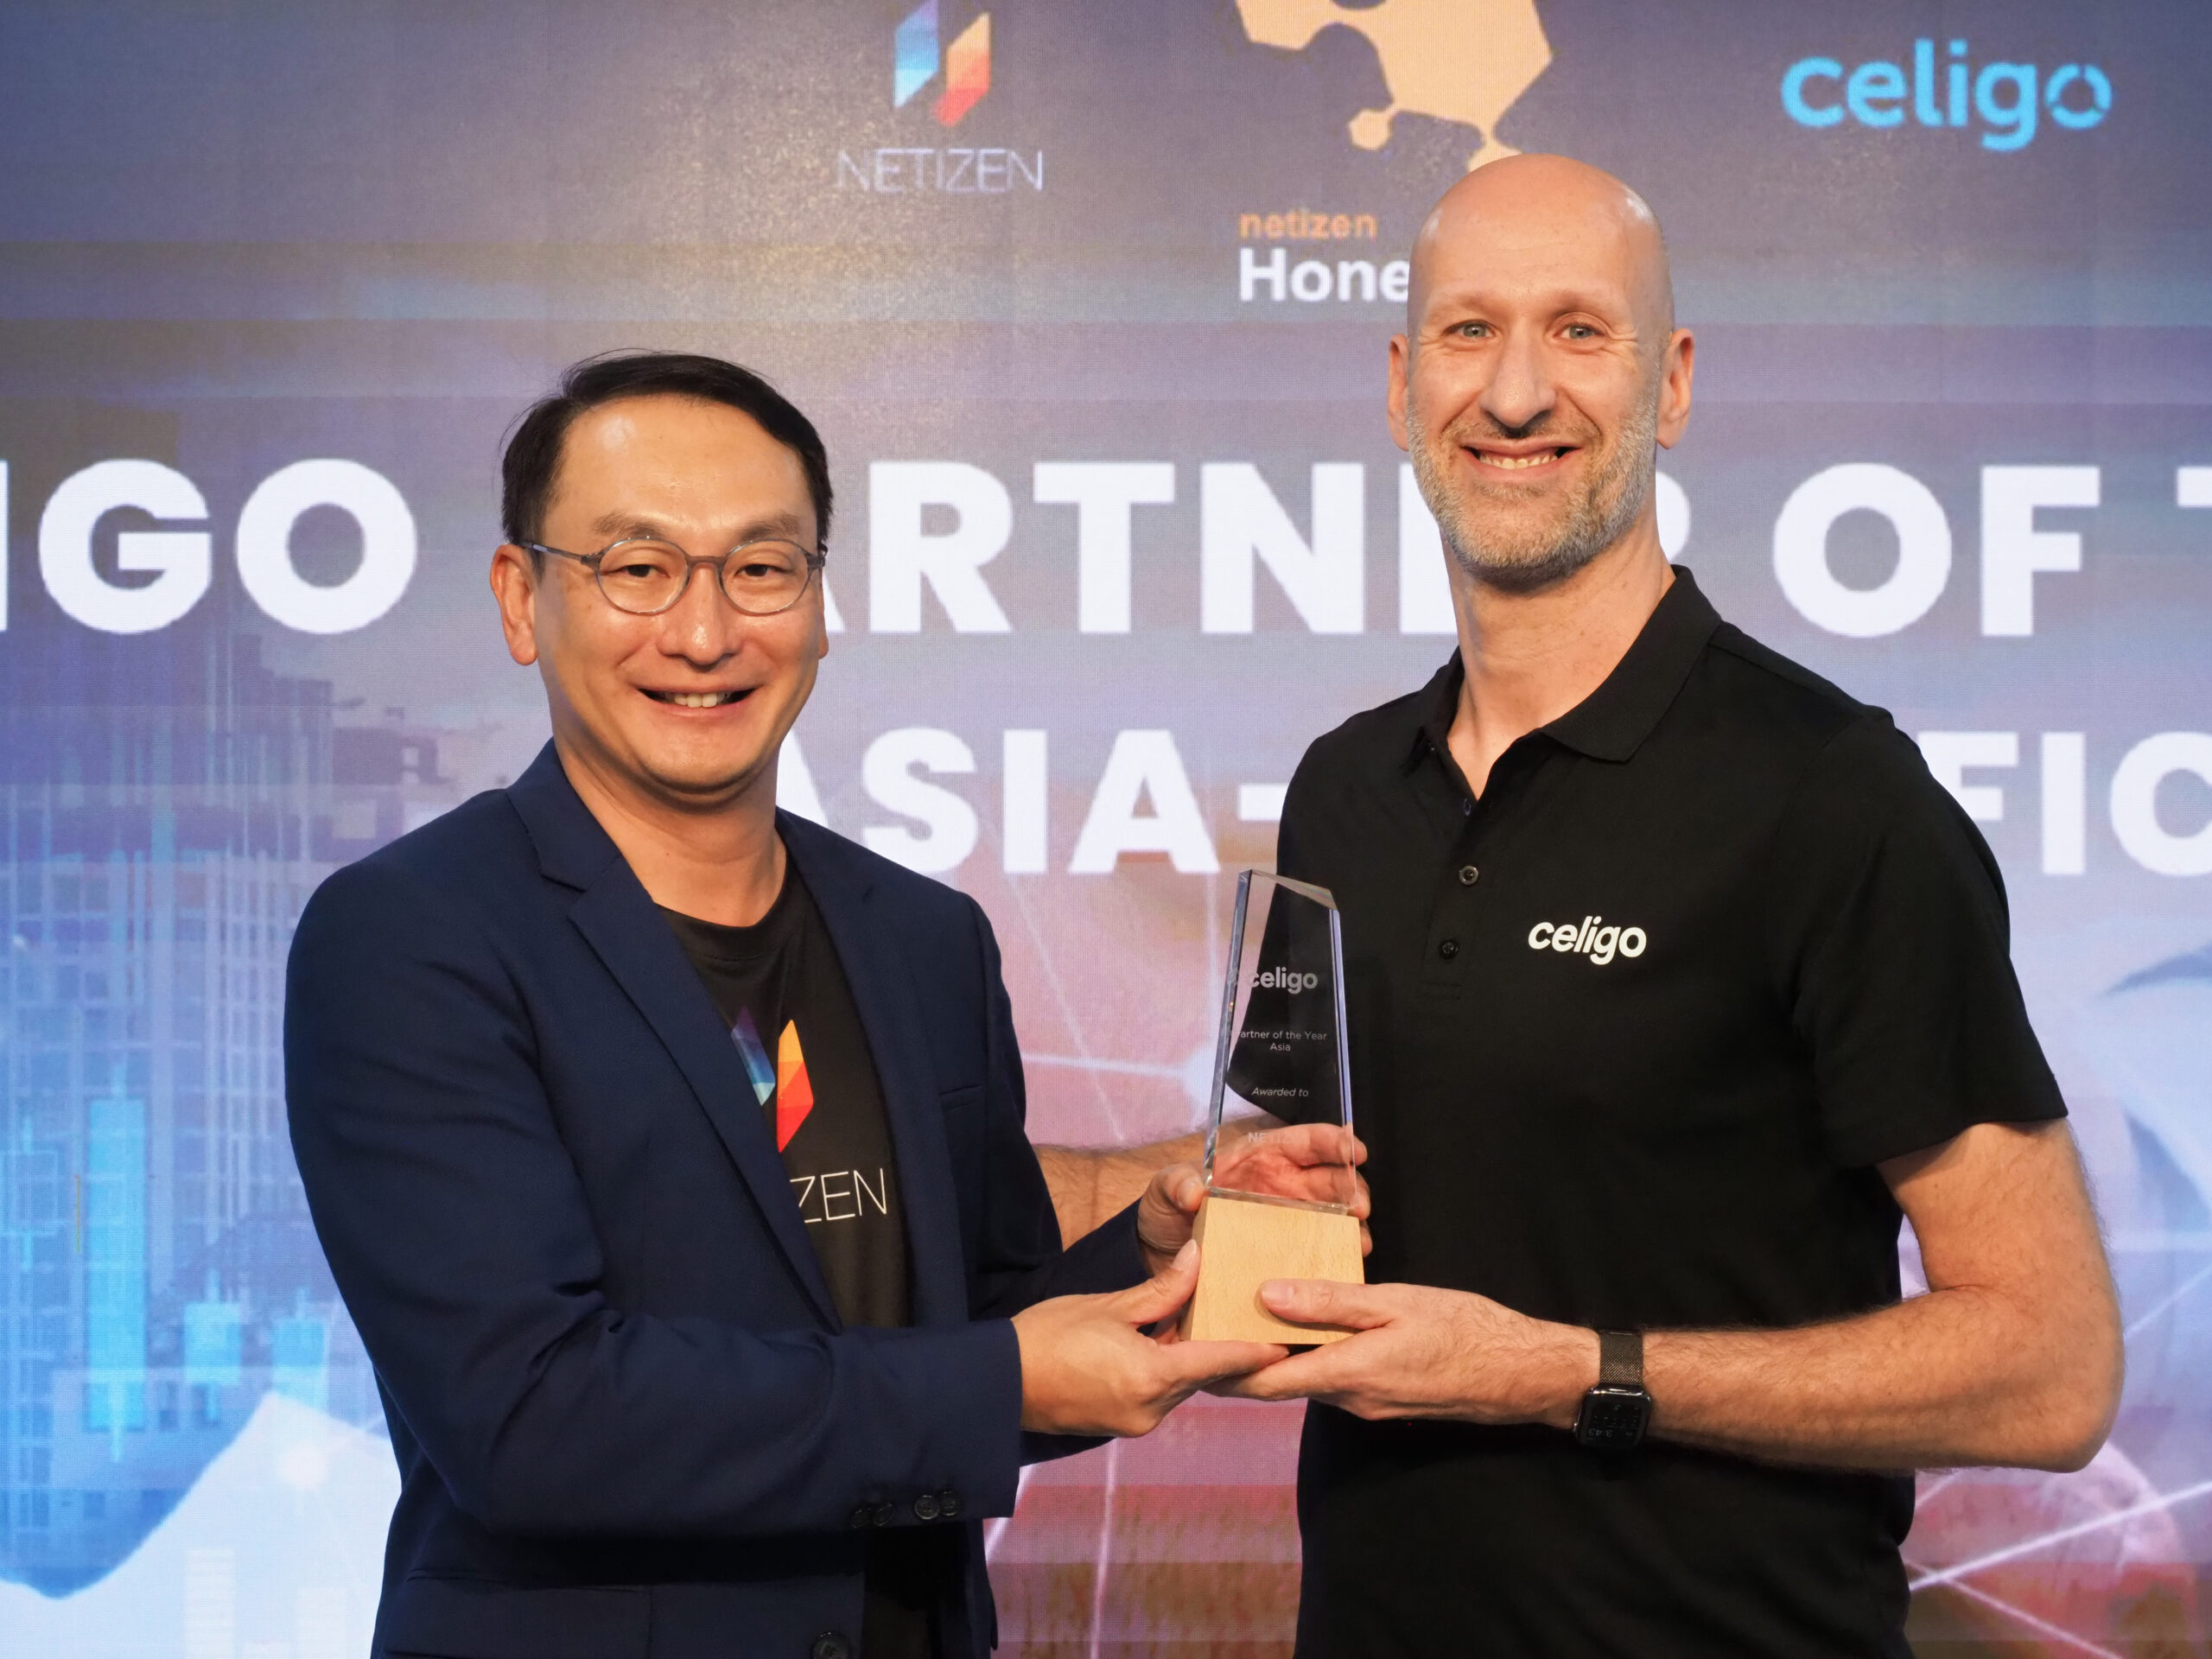 Netizen has been awarded "Partner of the Year Asia" by Celigo, a leading Integration Technology company from the United States, for development of the HoneyConn solution.